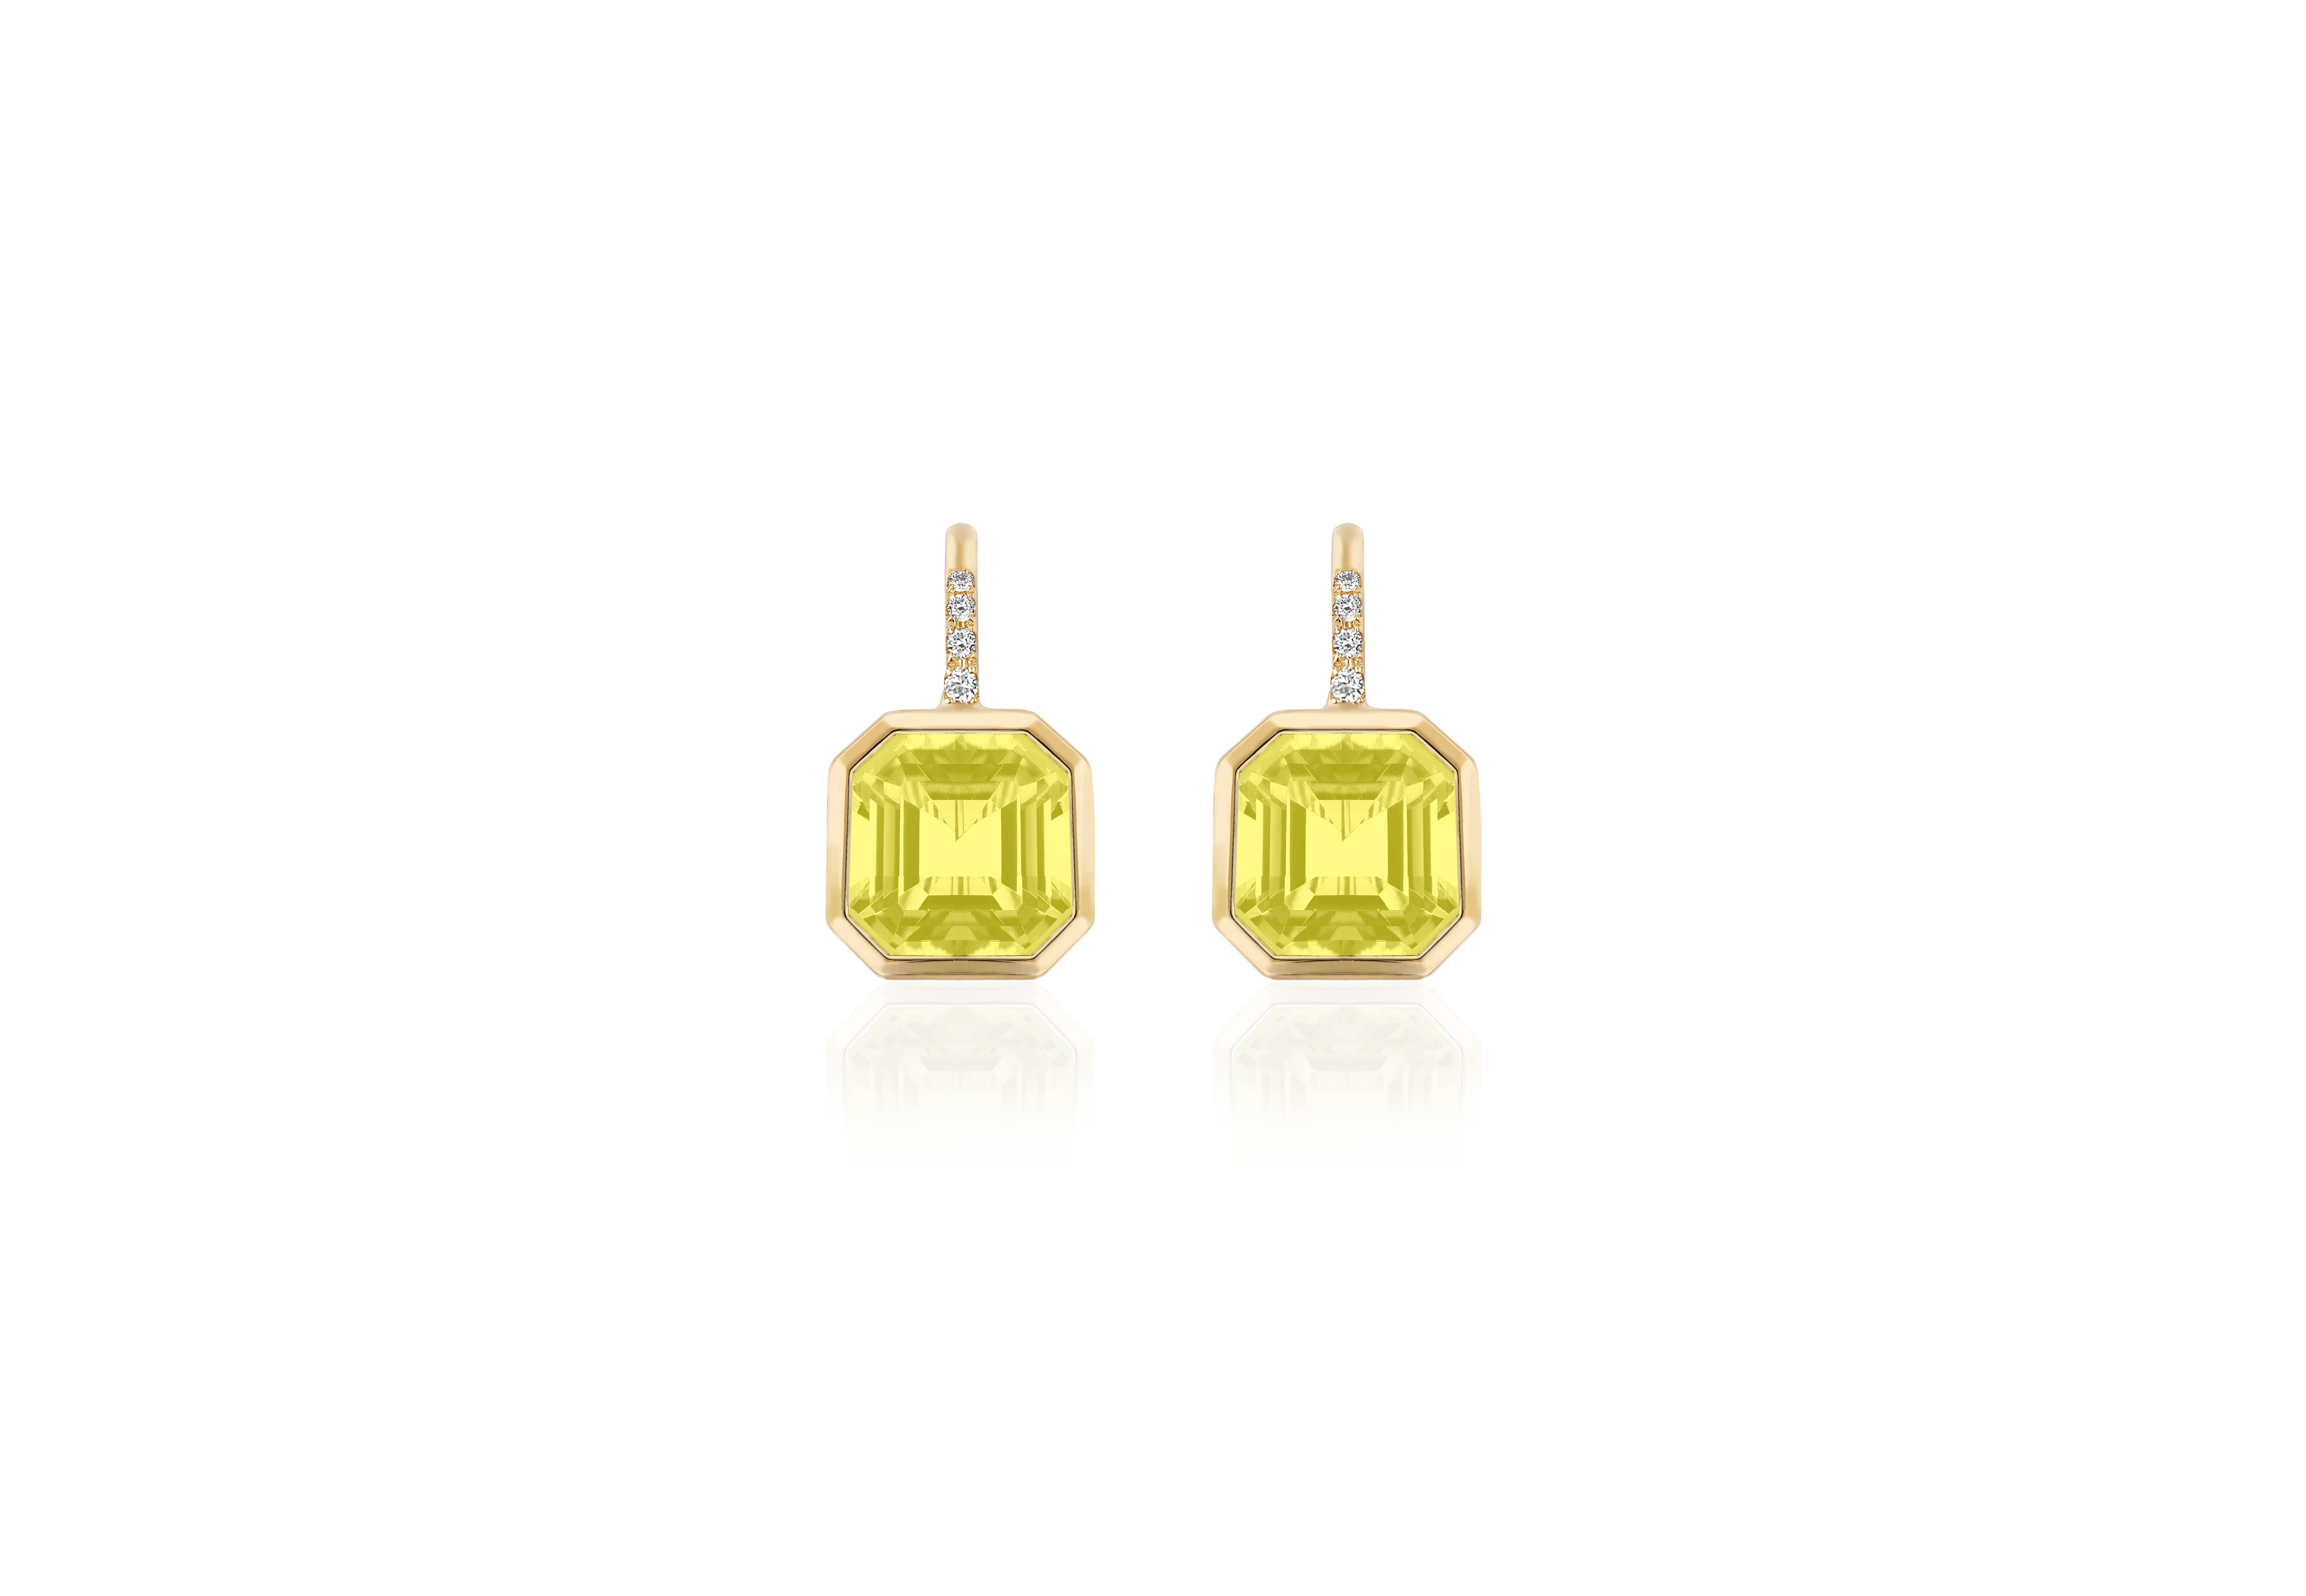 Elevate your style with these exquisite earrings featuring a stunning 9 x 9 mm Asscher-Cut Lemon Quartz gemstone. Expertly set on a delicate wire of 18K Gold, these earrings are adorned with four dazzling Diamonds, adding a touch of luxury and